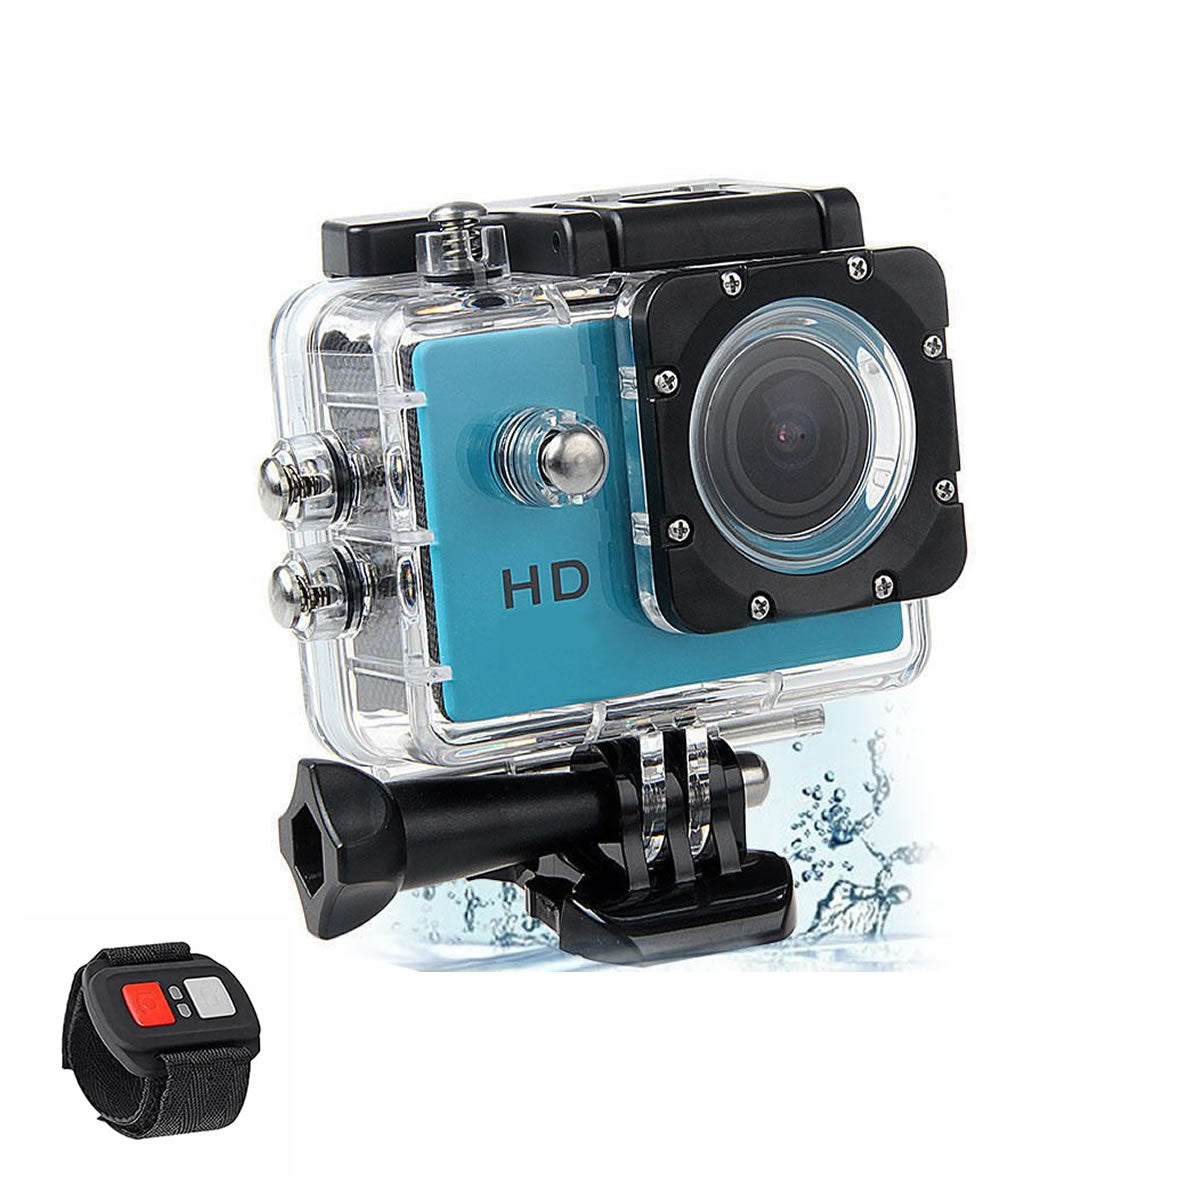 4K Action Pro Waterproof All Digital UHD WiFi Camera + RF Remote And Accessories by VistaShops